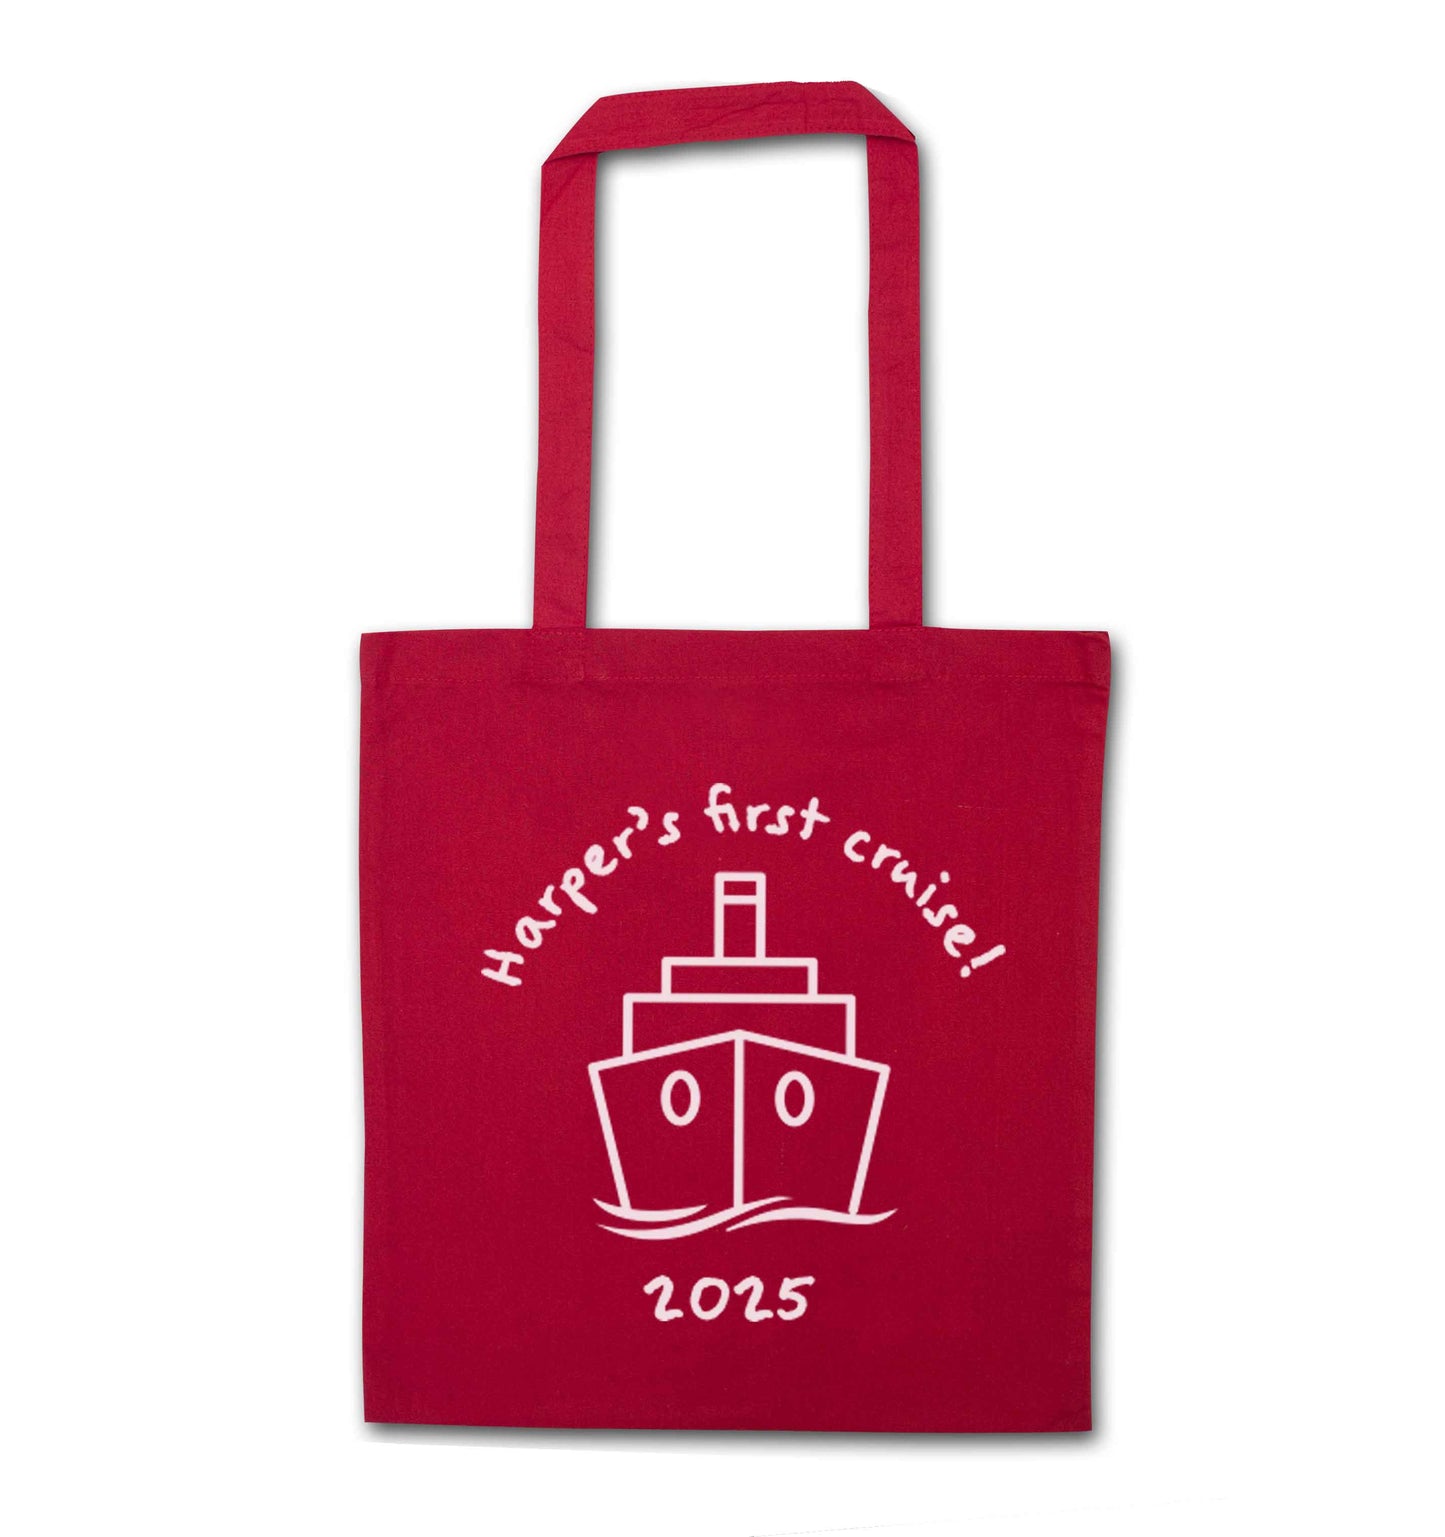 Personalised first cruise red tote bag